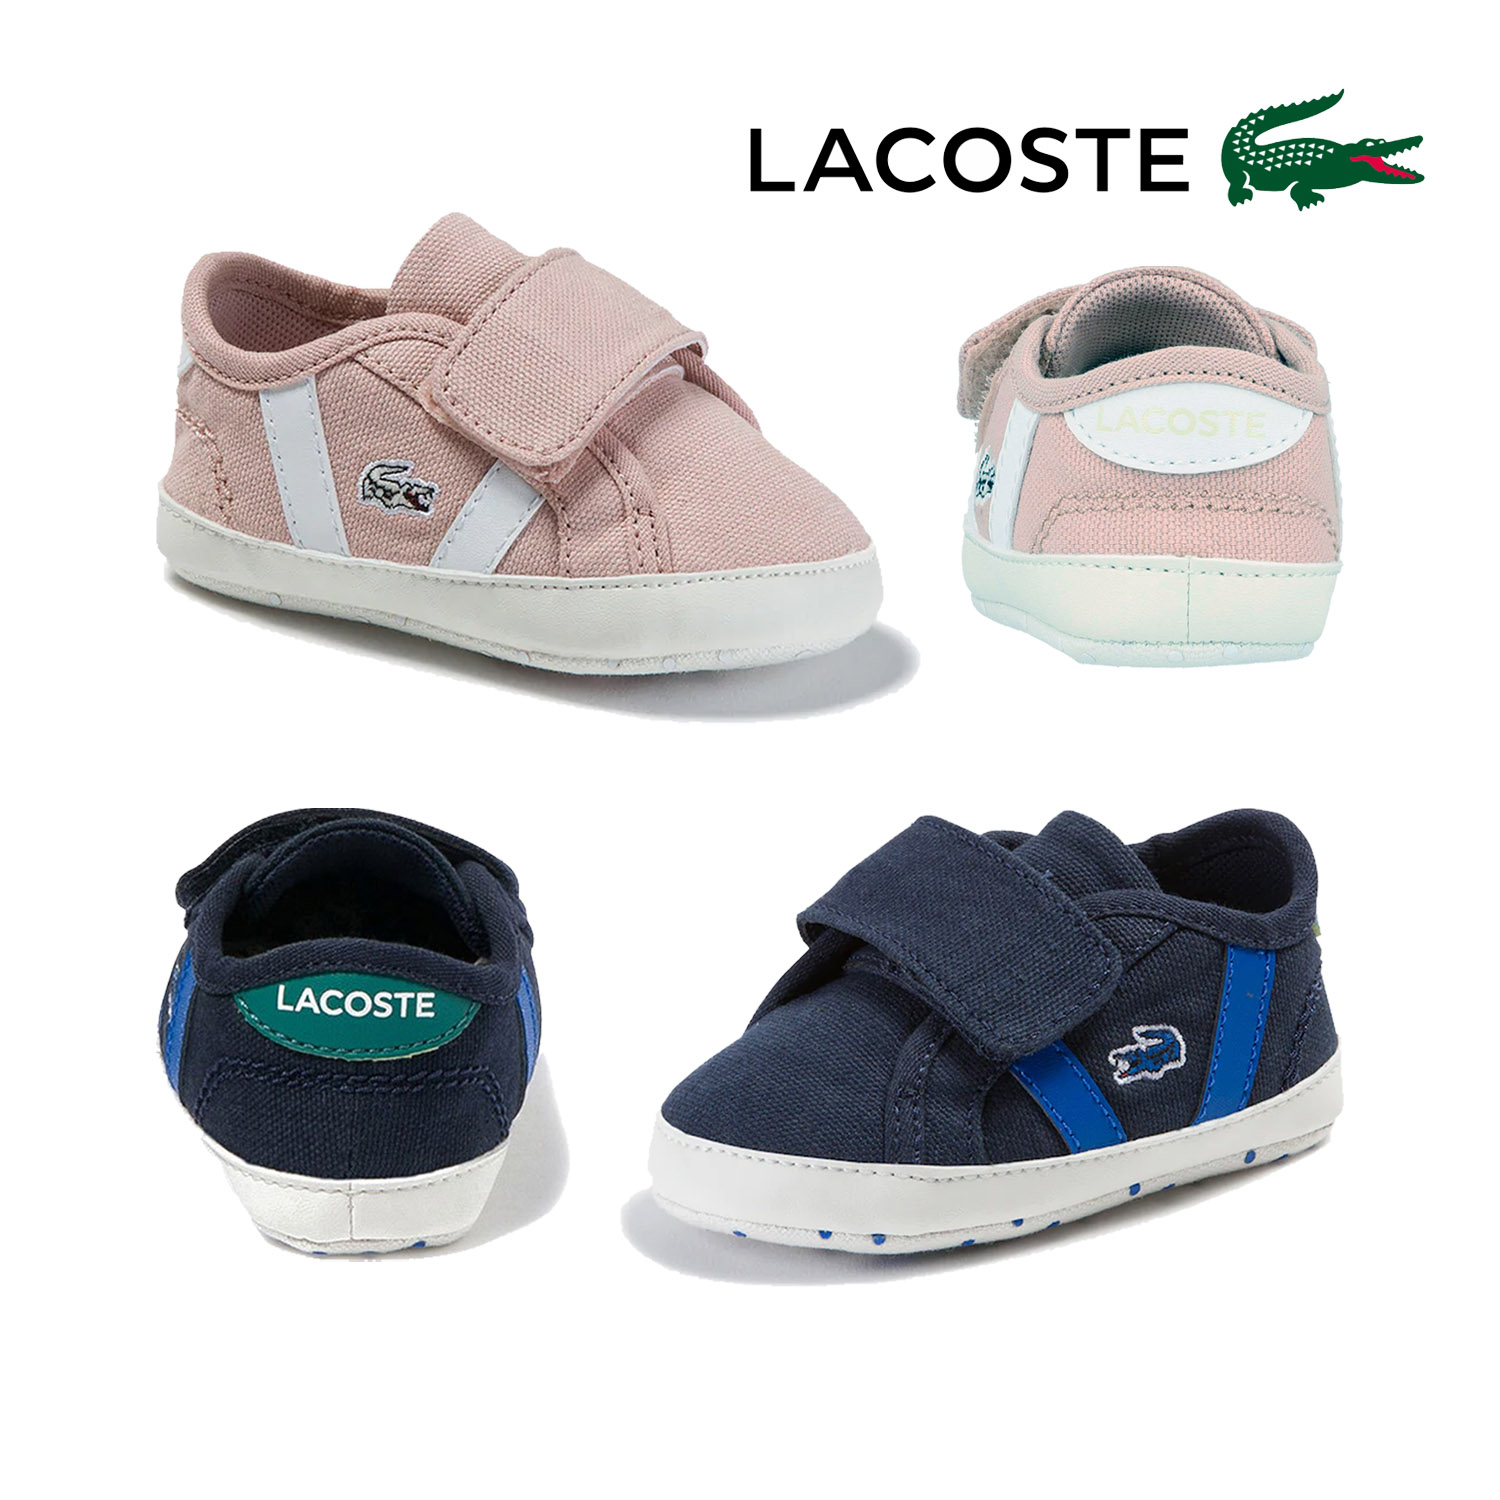 my lacoste